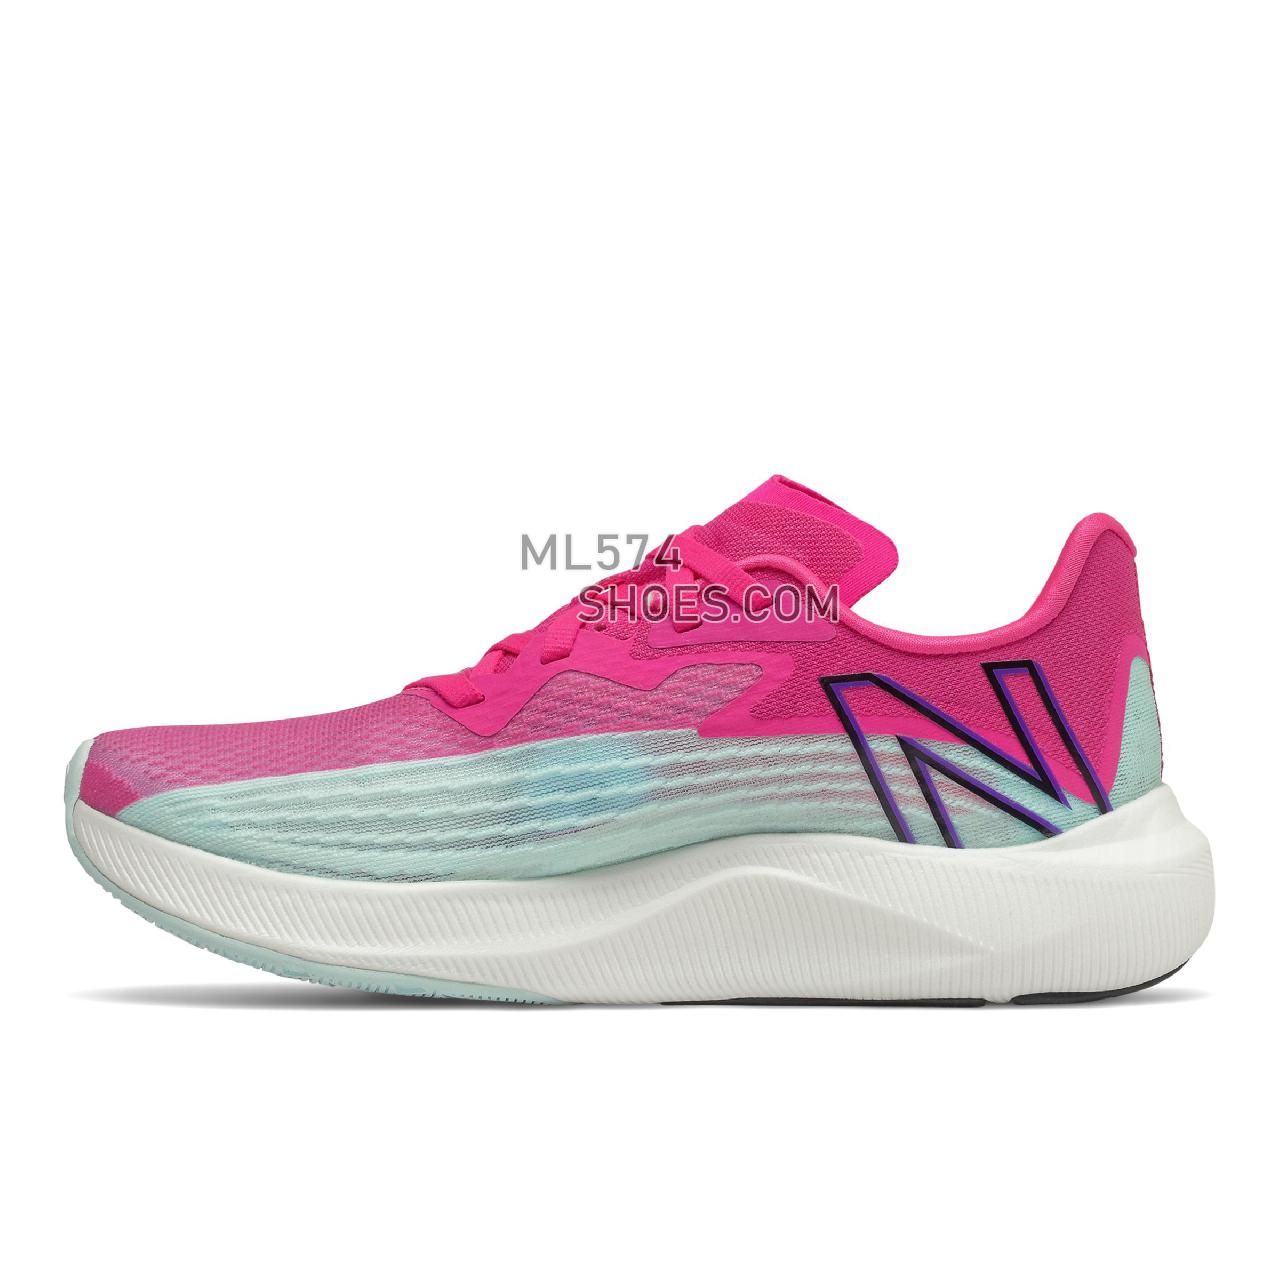 New Balance FuelCell Rebel v2 - Women's Neutral Running - Pale Blue Chill with Pink Glo - WFCXCP2